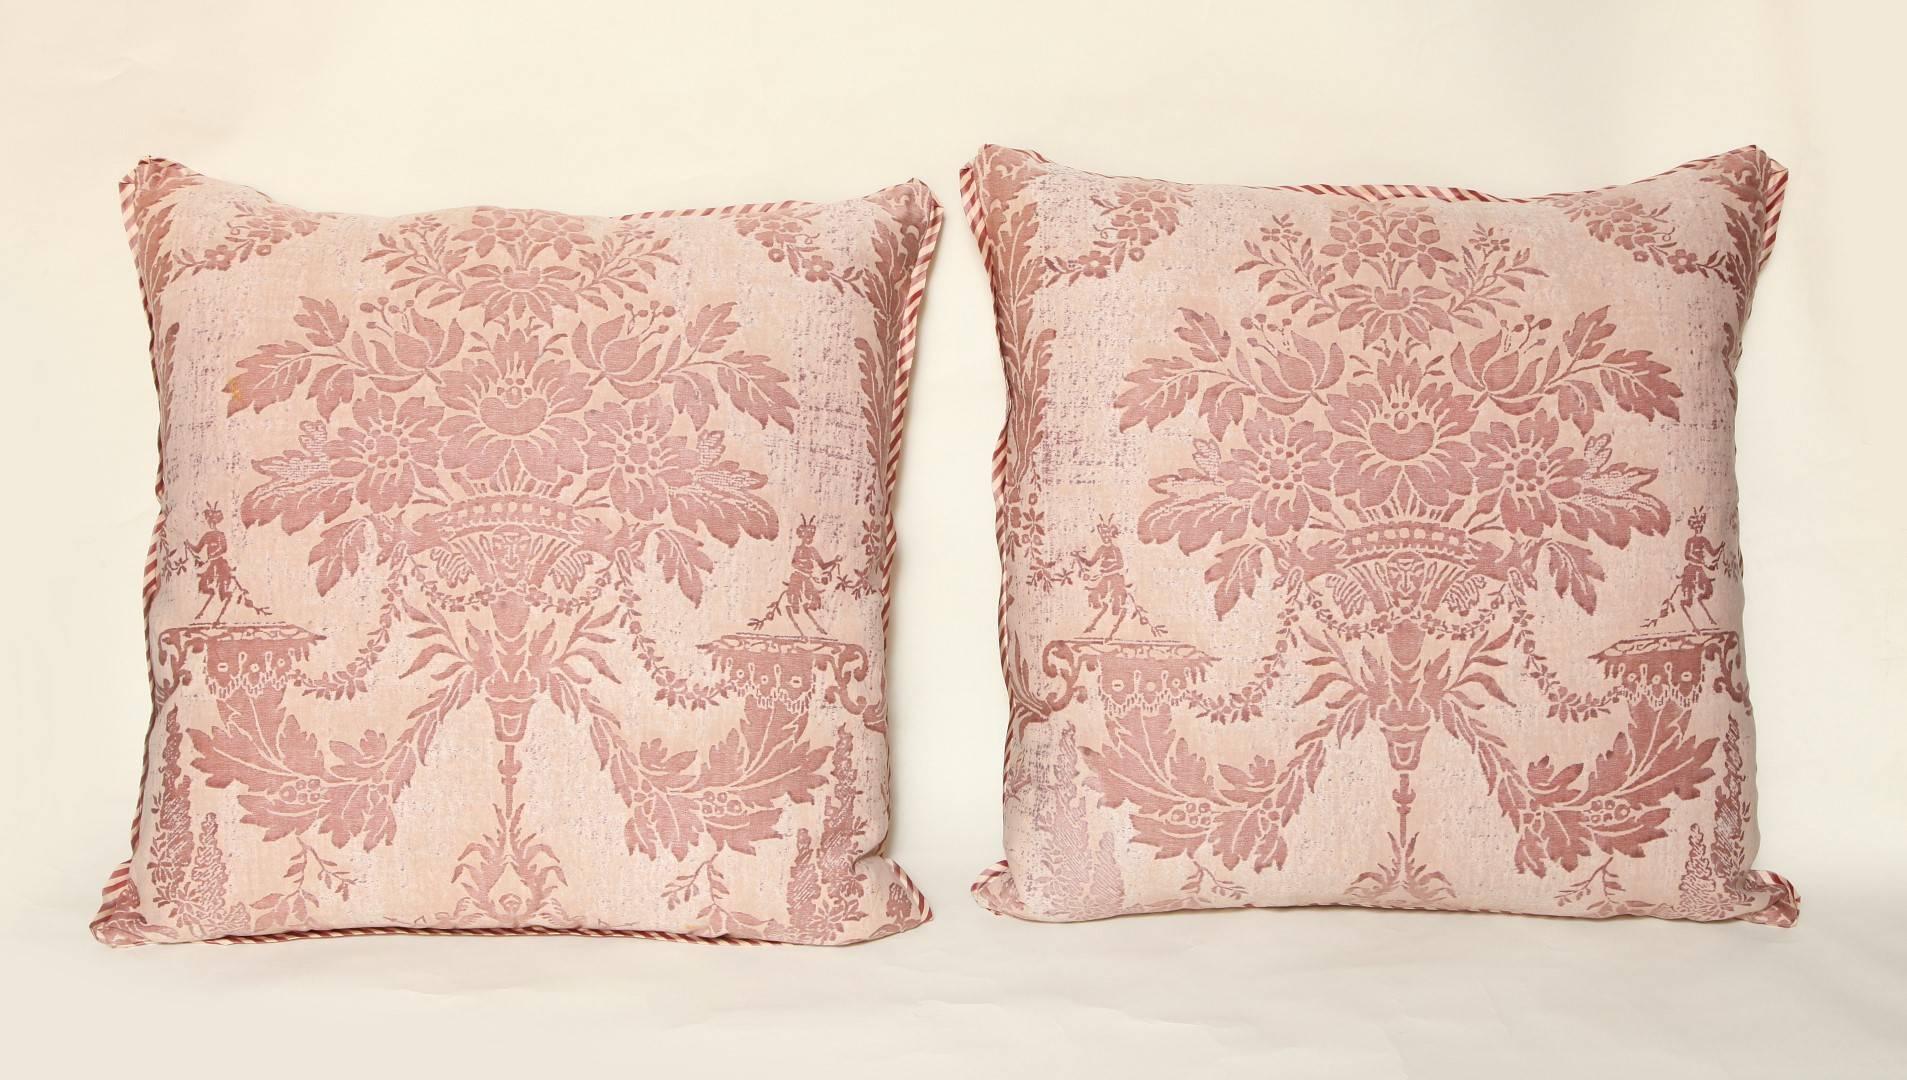 A pair of Fortuny cushions in the Boucher pattern, beige and rose color way with bias silk striped edging and raw silk back, the pattern named for the most celebrated painter and decorative artist of the 18th century, Francois Boucher (1703-1770.)